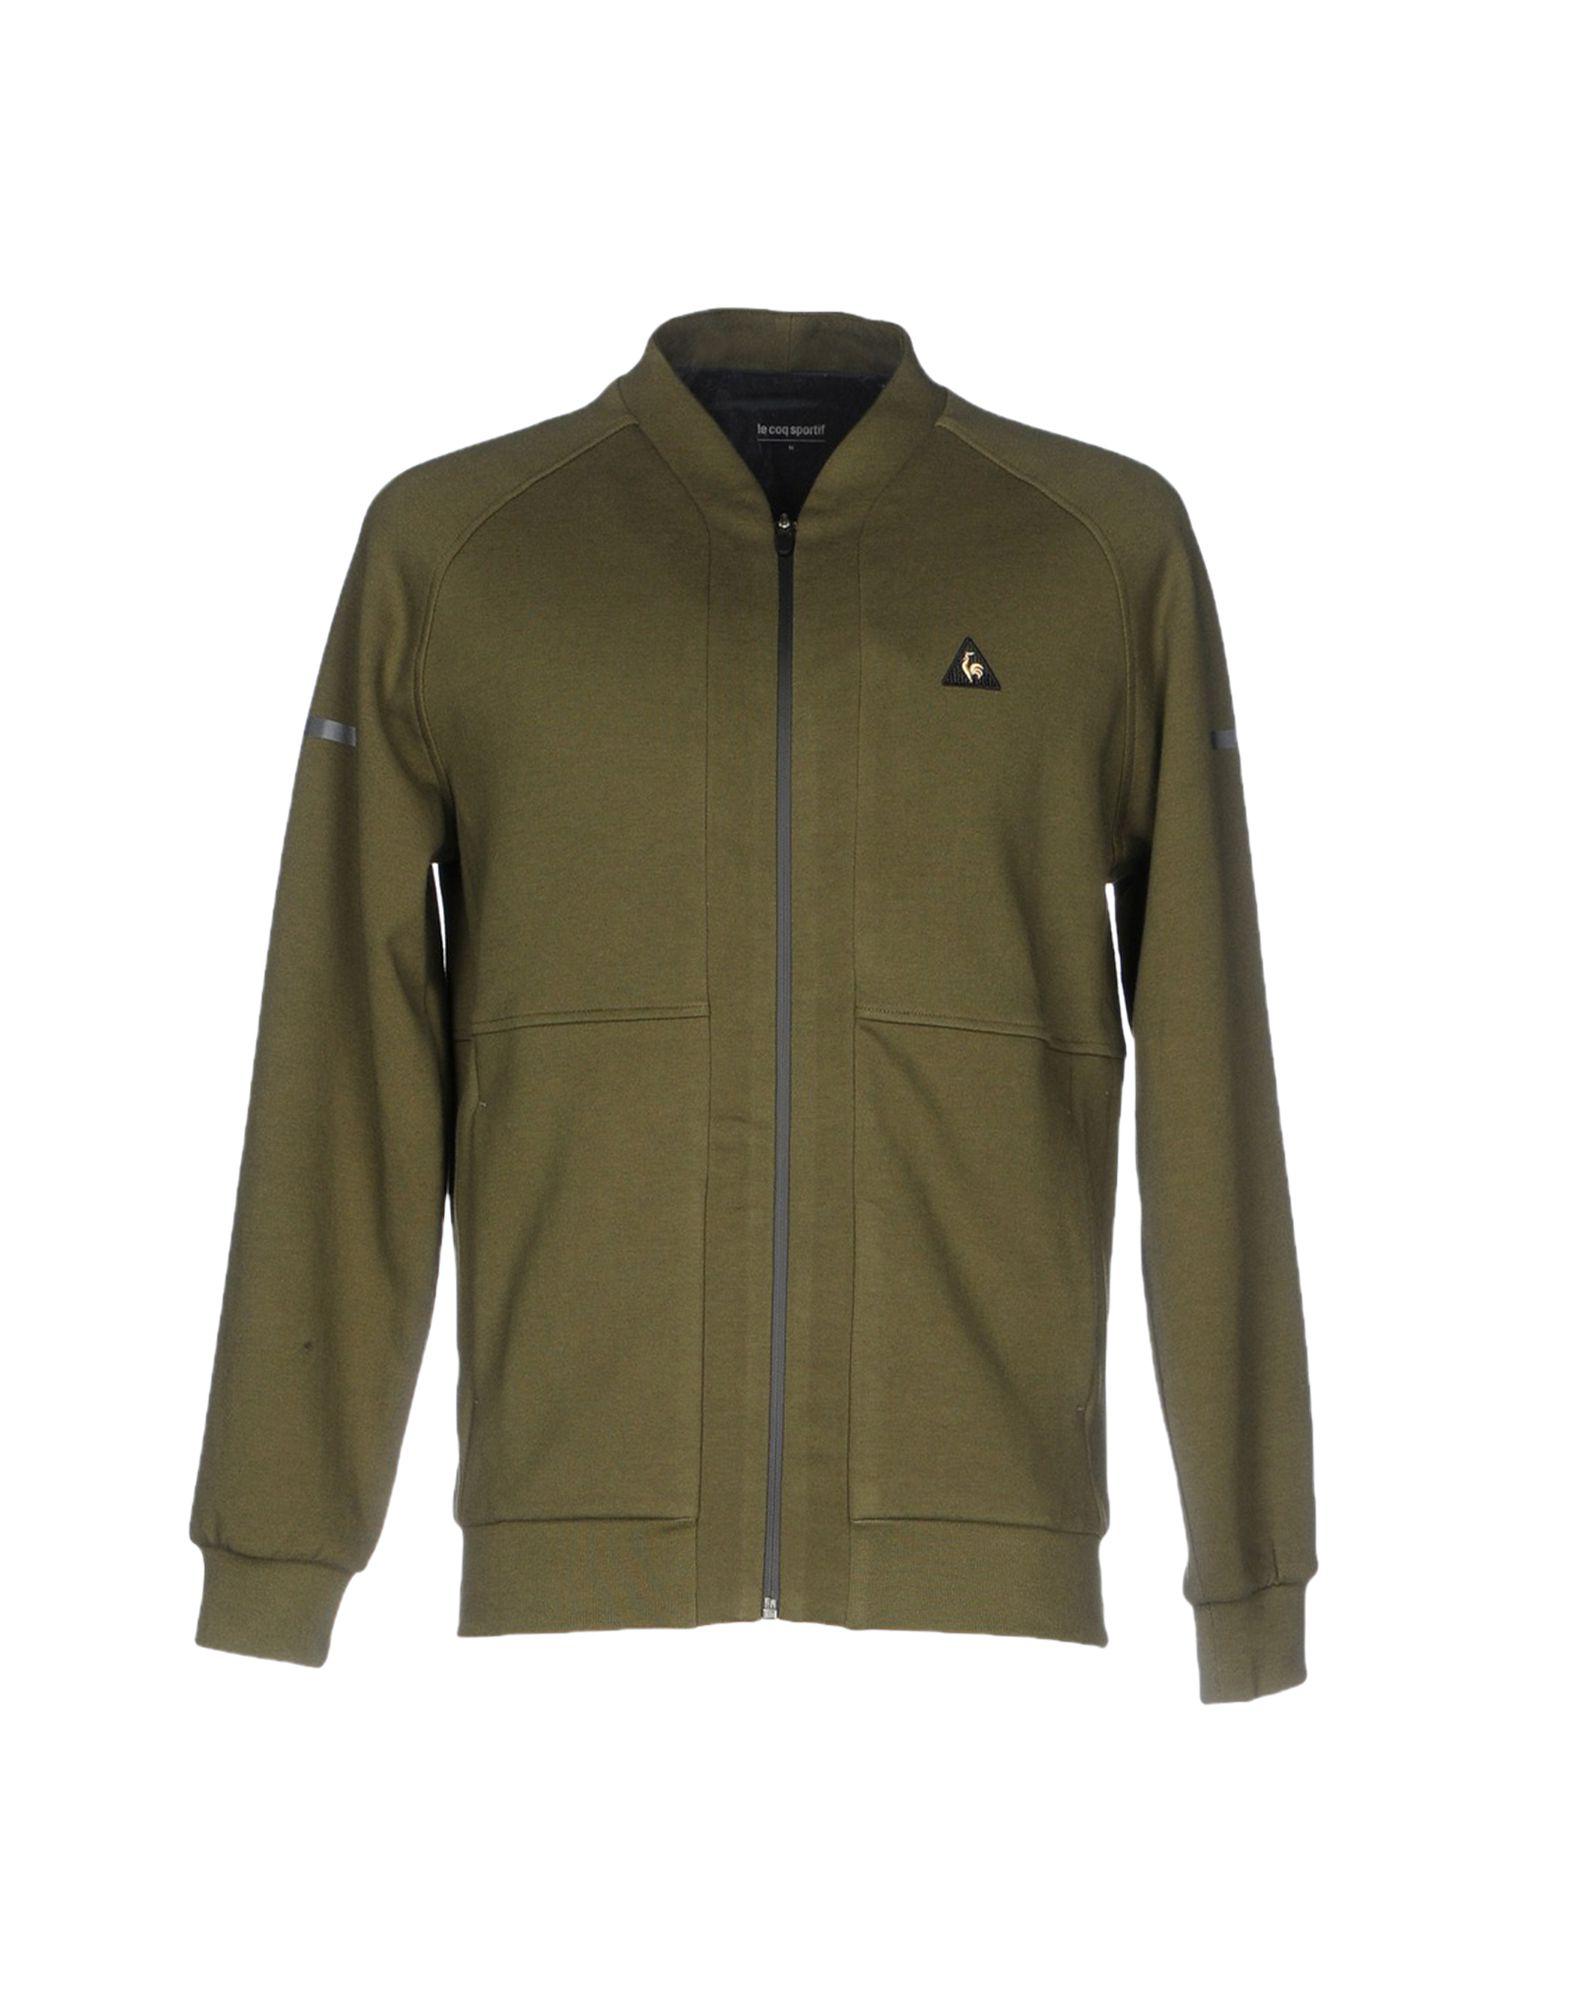 Le Coq Sportif Cotton Jacket in Military Green (Green) for Men - Lyst